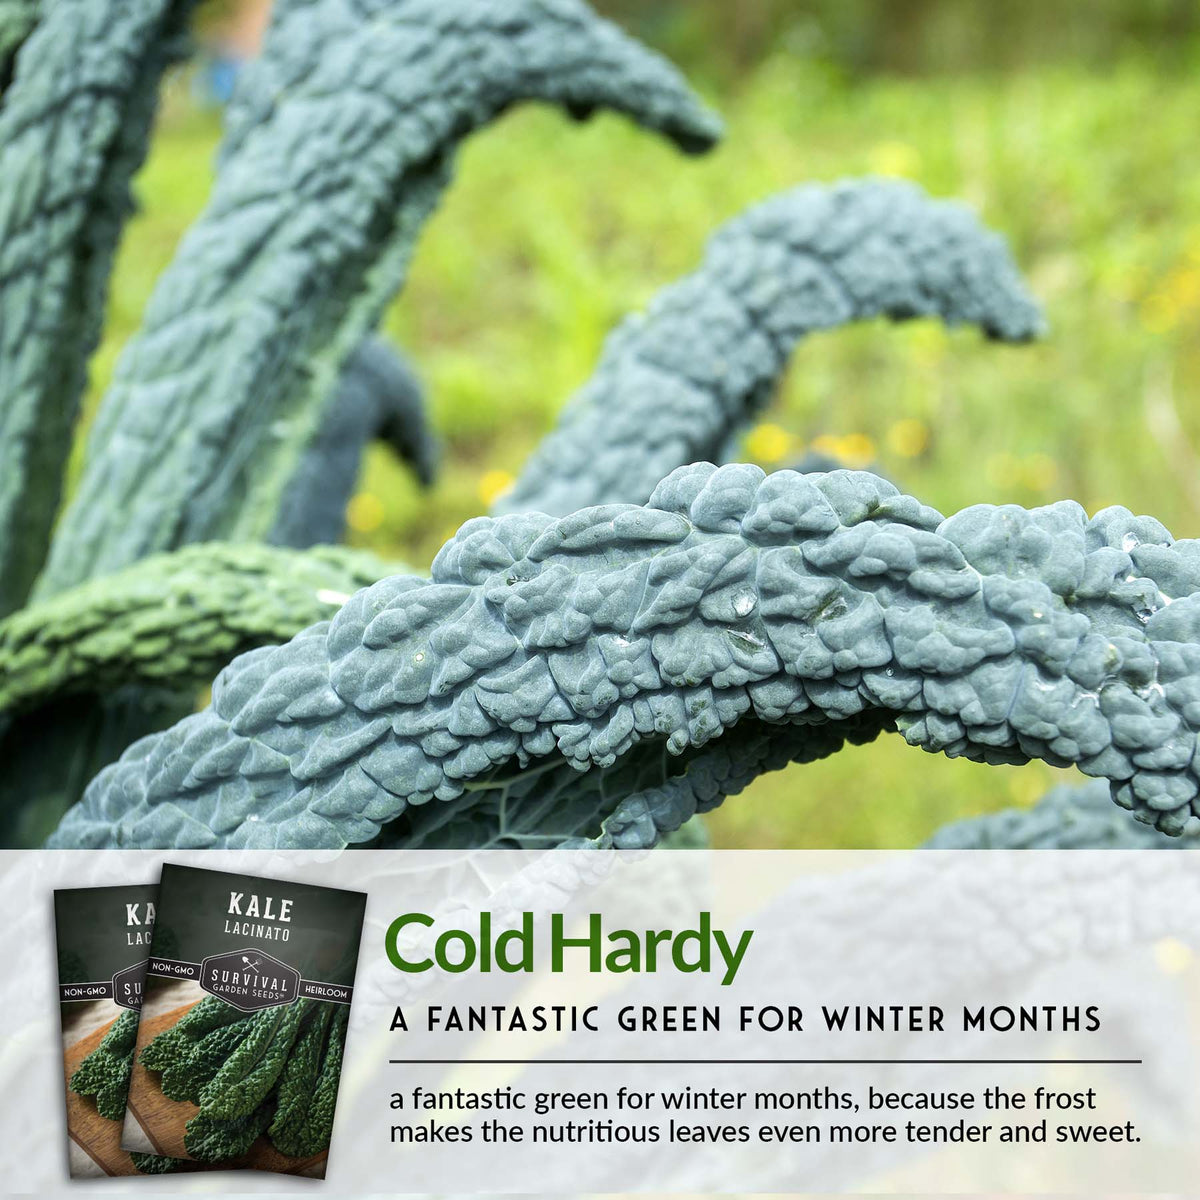 Kale is a cold hardy green that will last into winter